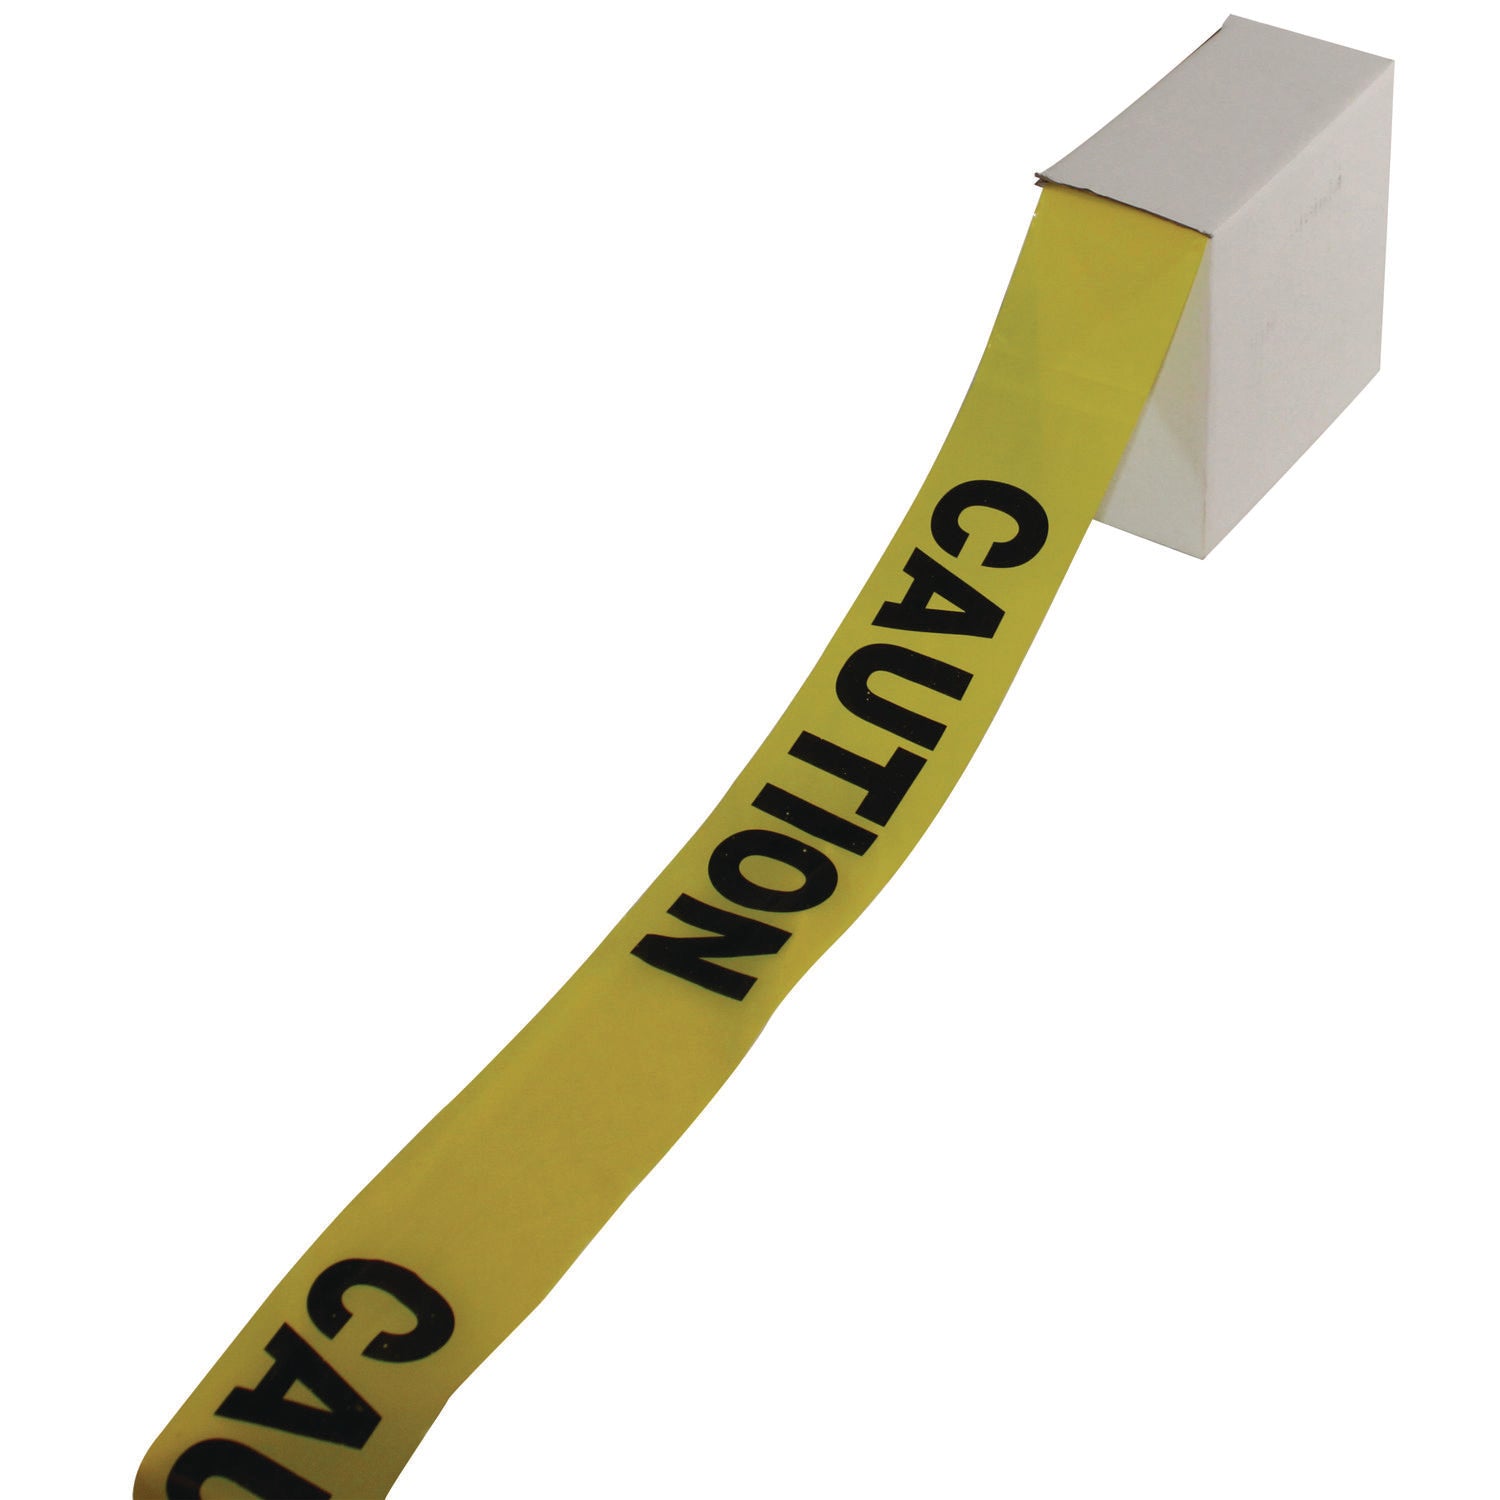 site-safety-barrier-tape-caution-text-3-x-1000-ft-yellow-black_imp7328 - 1